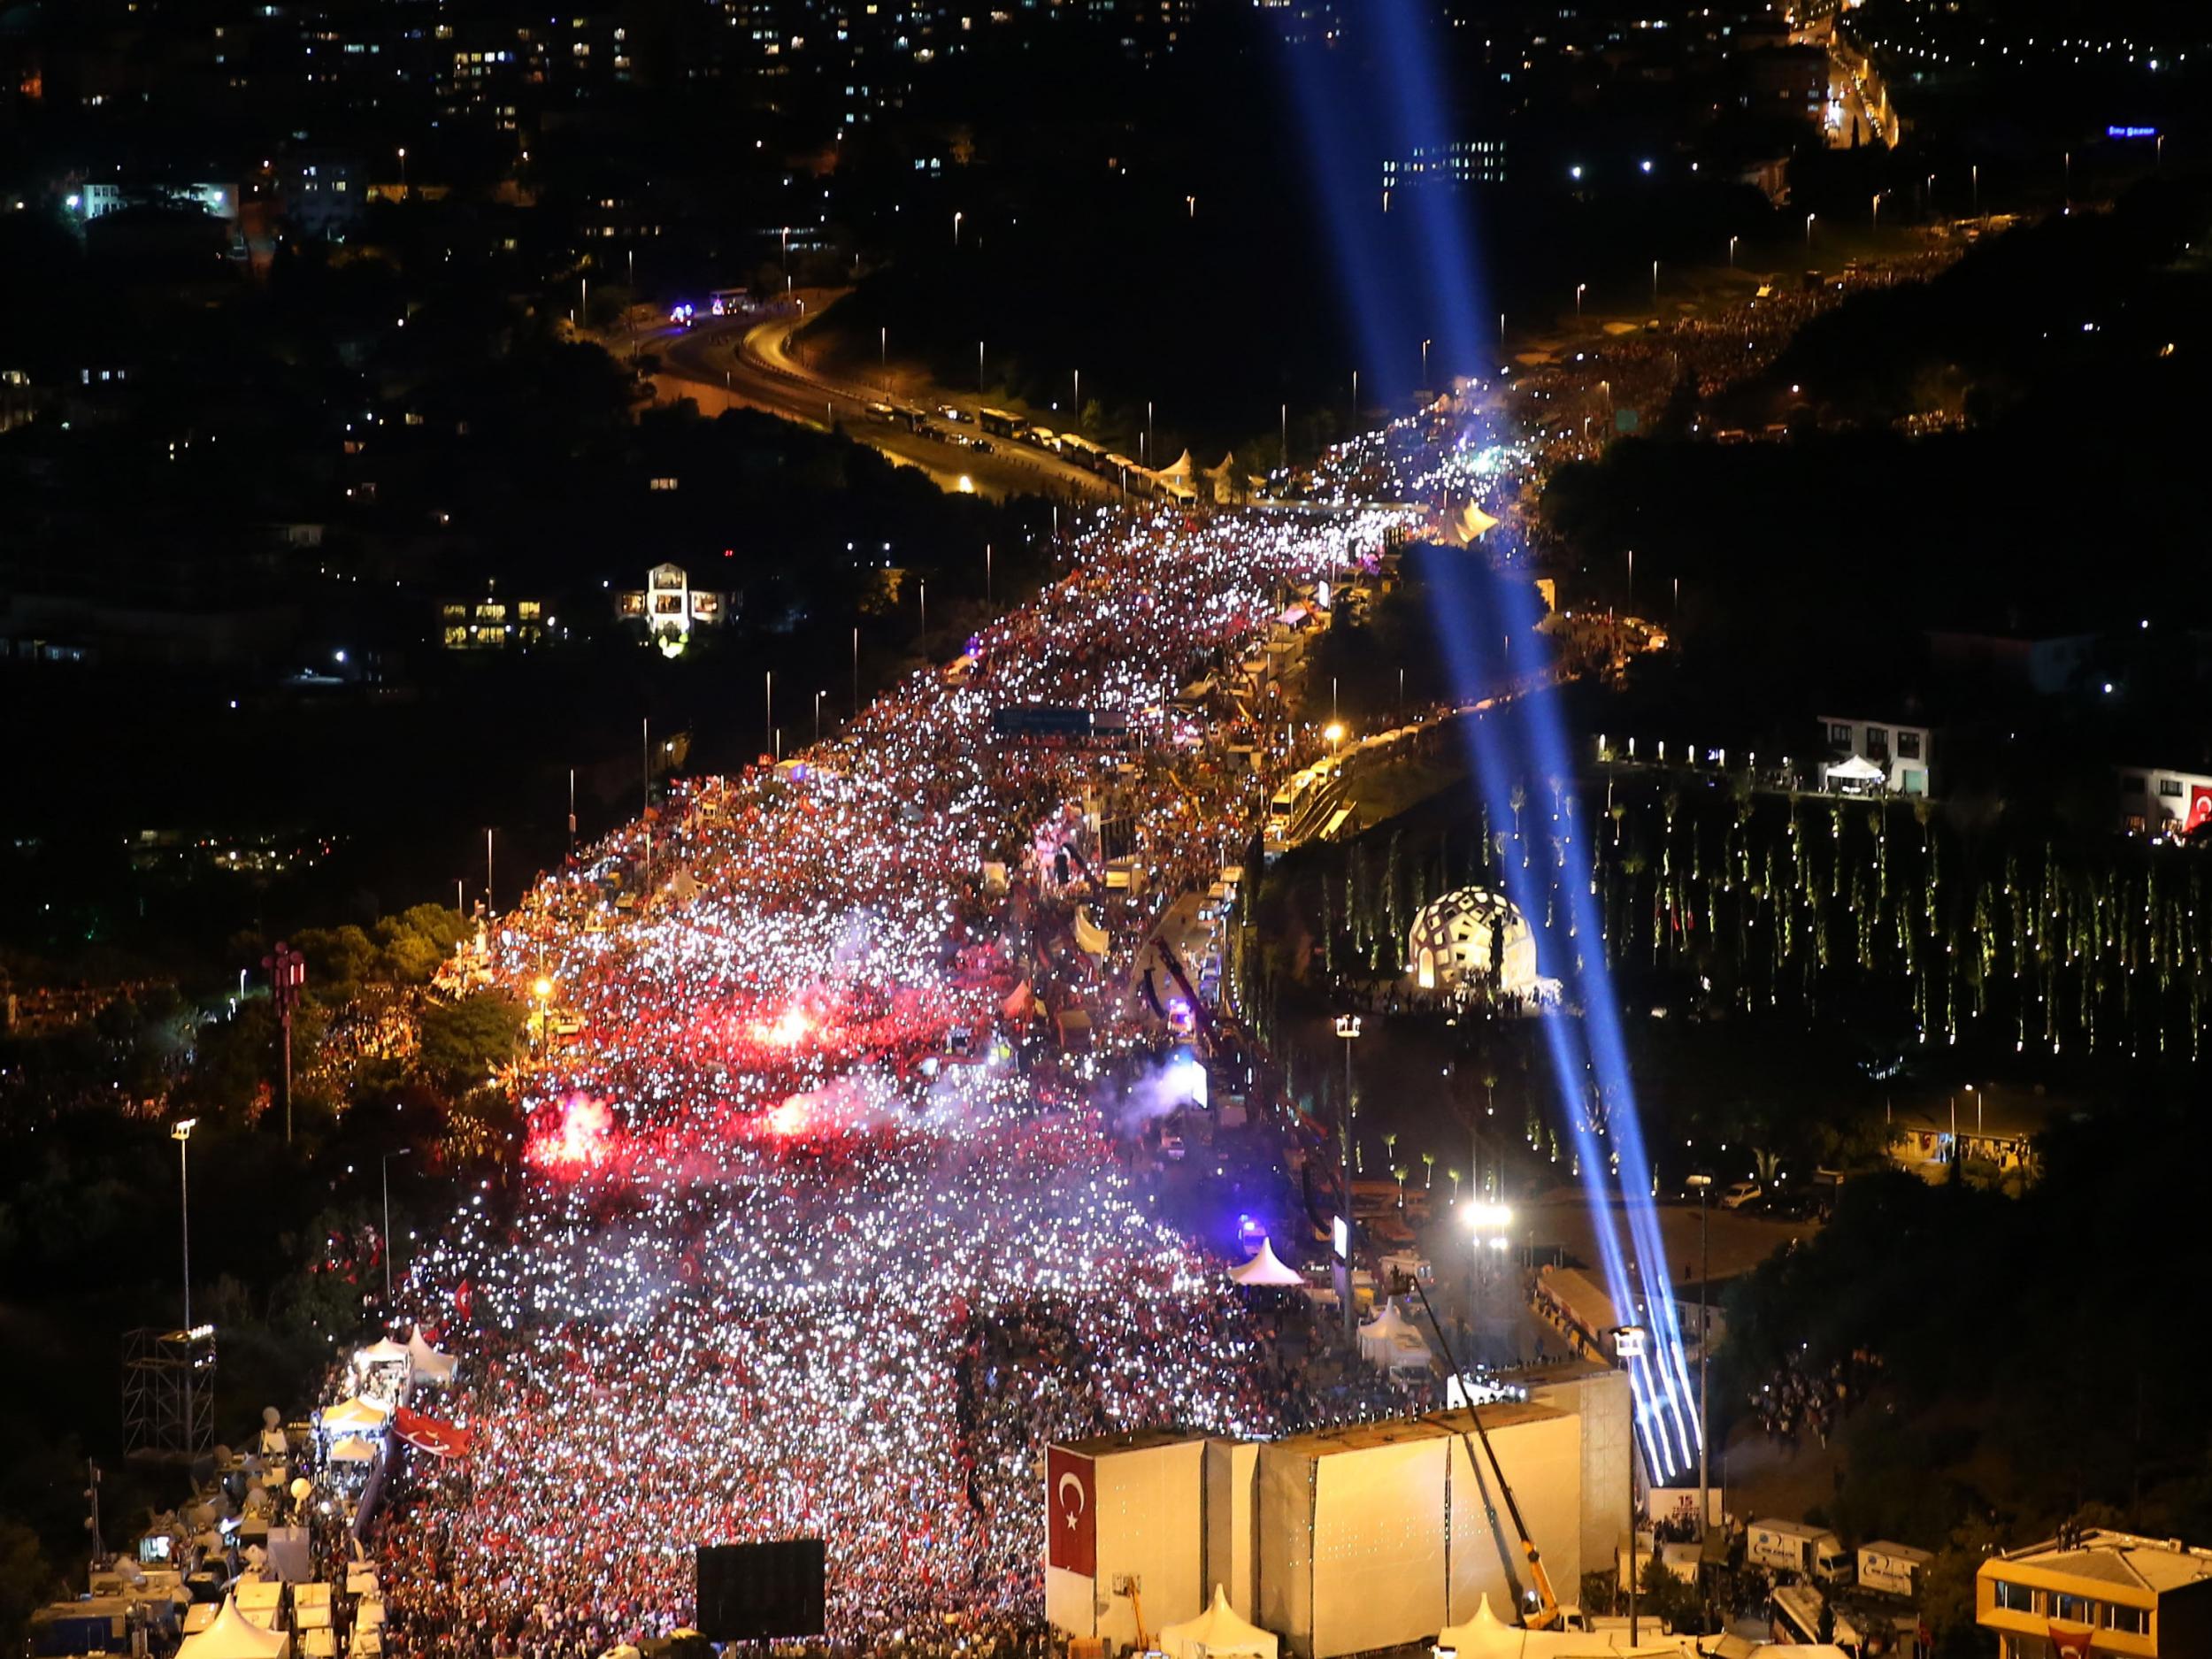 Vast crowds gathered in Istanbul